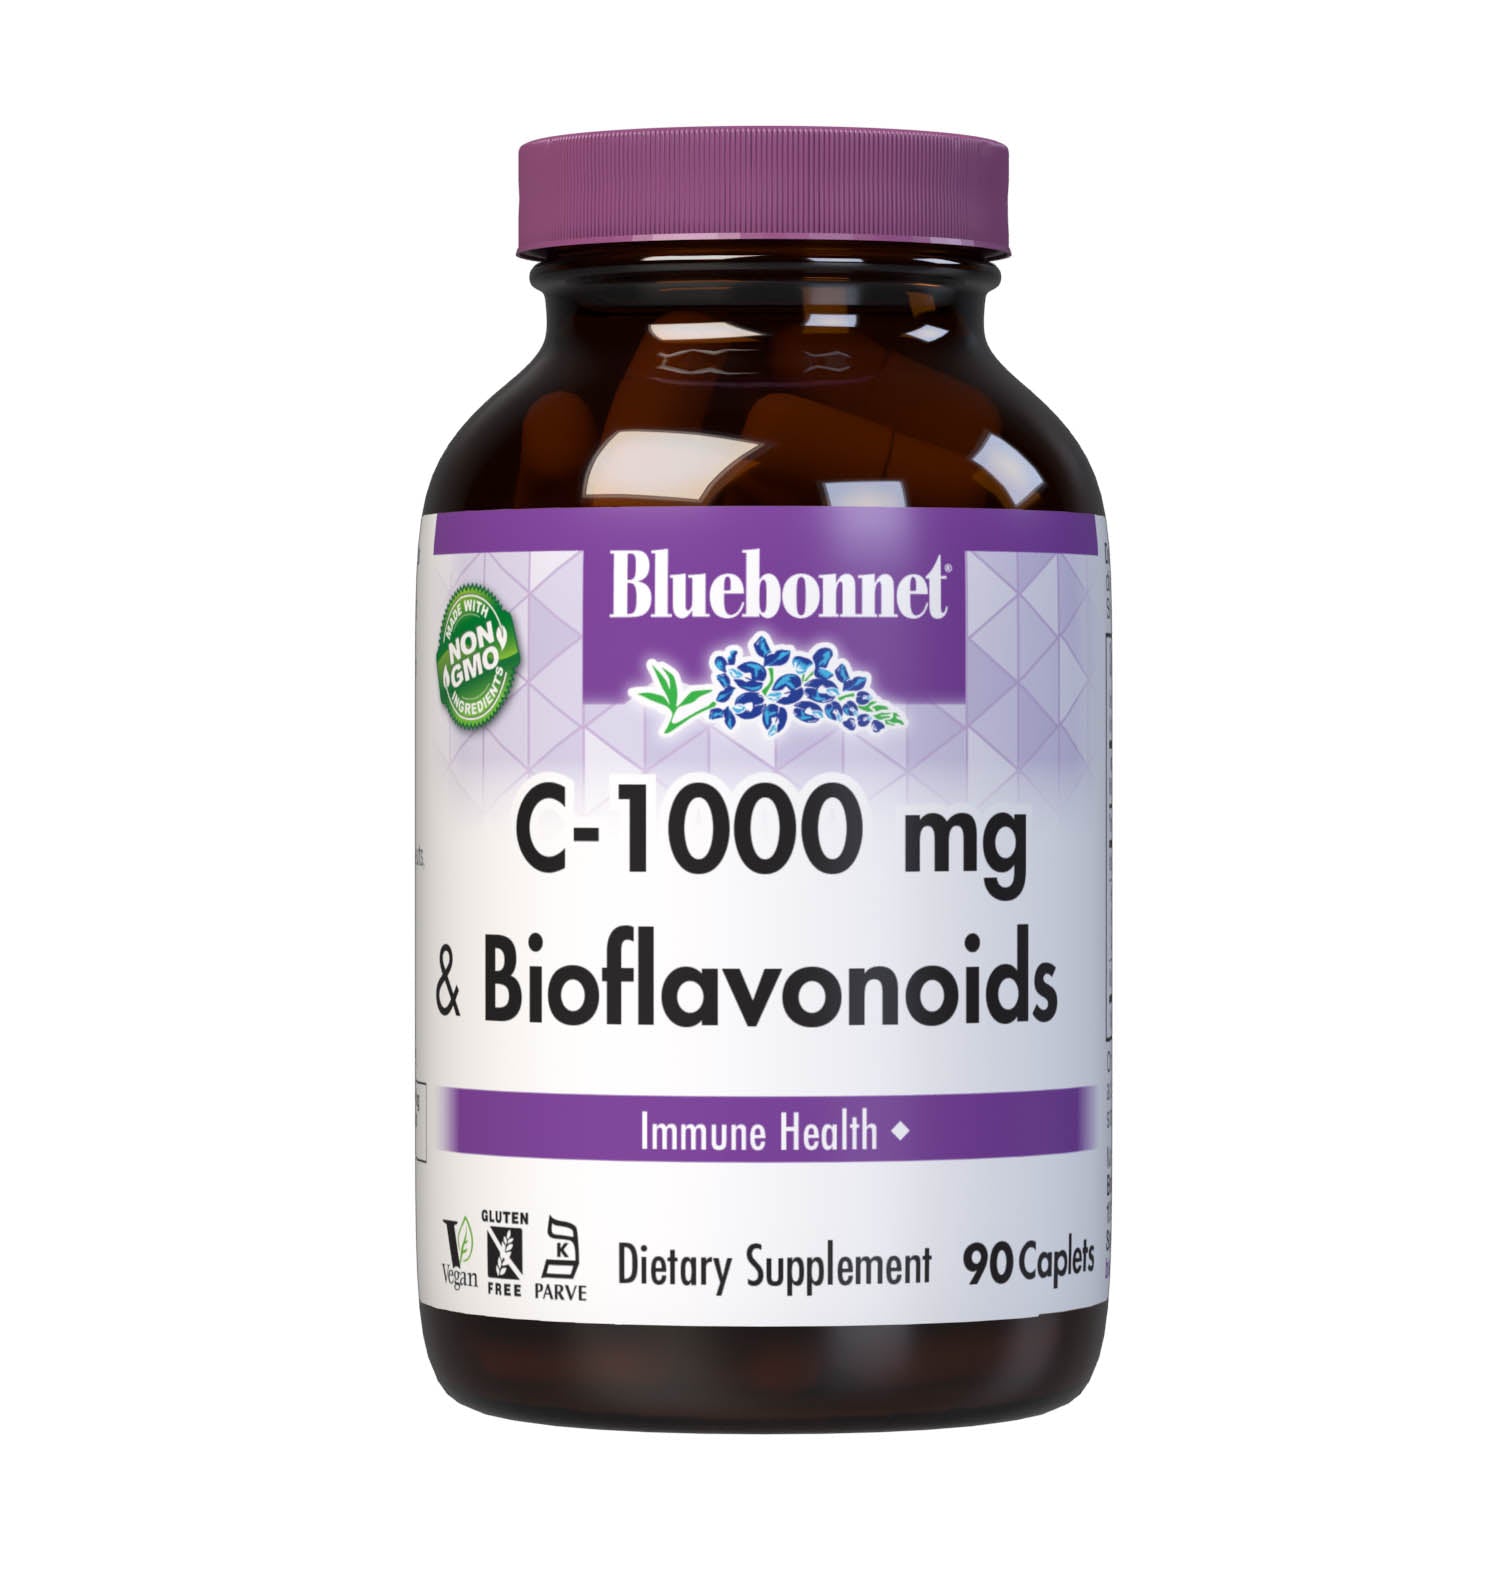 Bluebonnet’s C-1000 mg & Bioflavonoids 90 Caplets are formulated with vitamin C from L-ascorbic acid that is (IP) identity-preserved and non-GMO with citrus bioflavonoids from oranges, lemons, tangerines, grapefruits and limes to help support immune health. #size_90 count